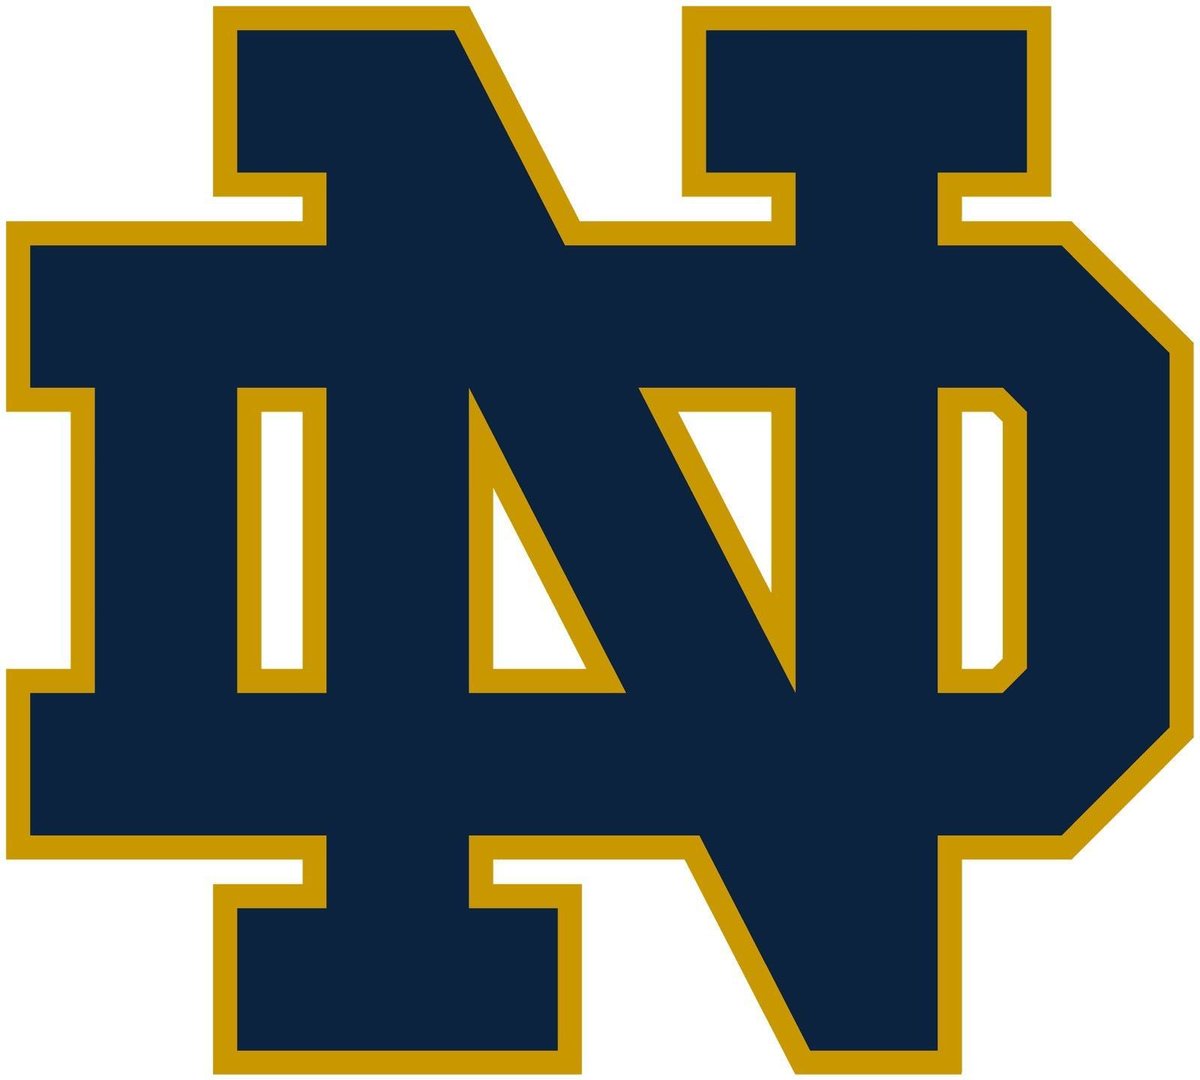 #AGTG after a great call with @CoachWash56 I am beyond blessed to receive my 18th D1 offer from the University of Notre Dame!!! ☘️☘️#OKpreps @BrandonDrumm247 @Josh_Scoop @halliehart @CodyNagel247 @ParkerThune @BenjaminRohaly @NDFootball